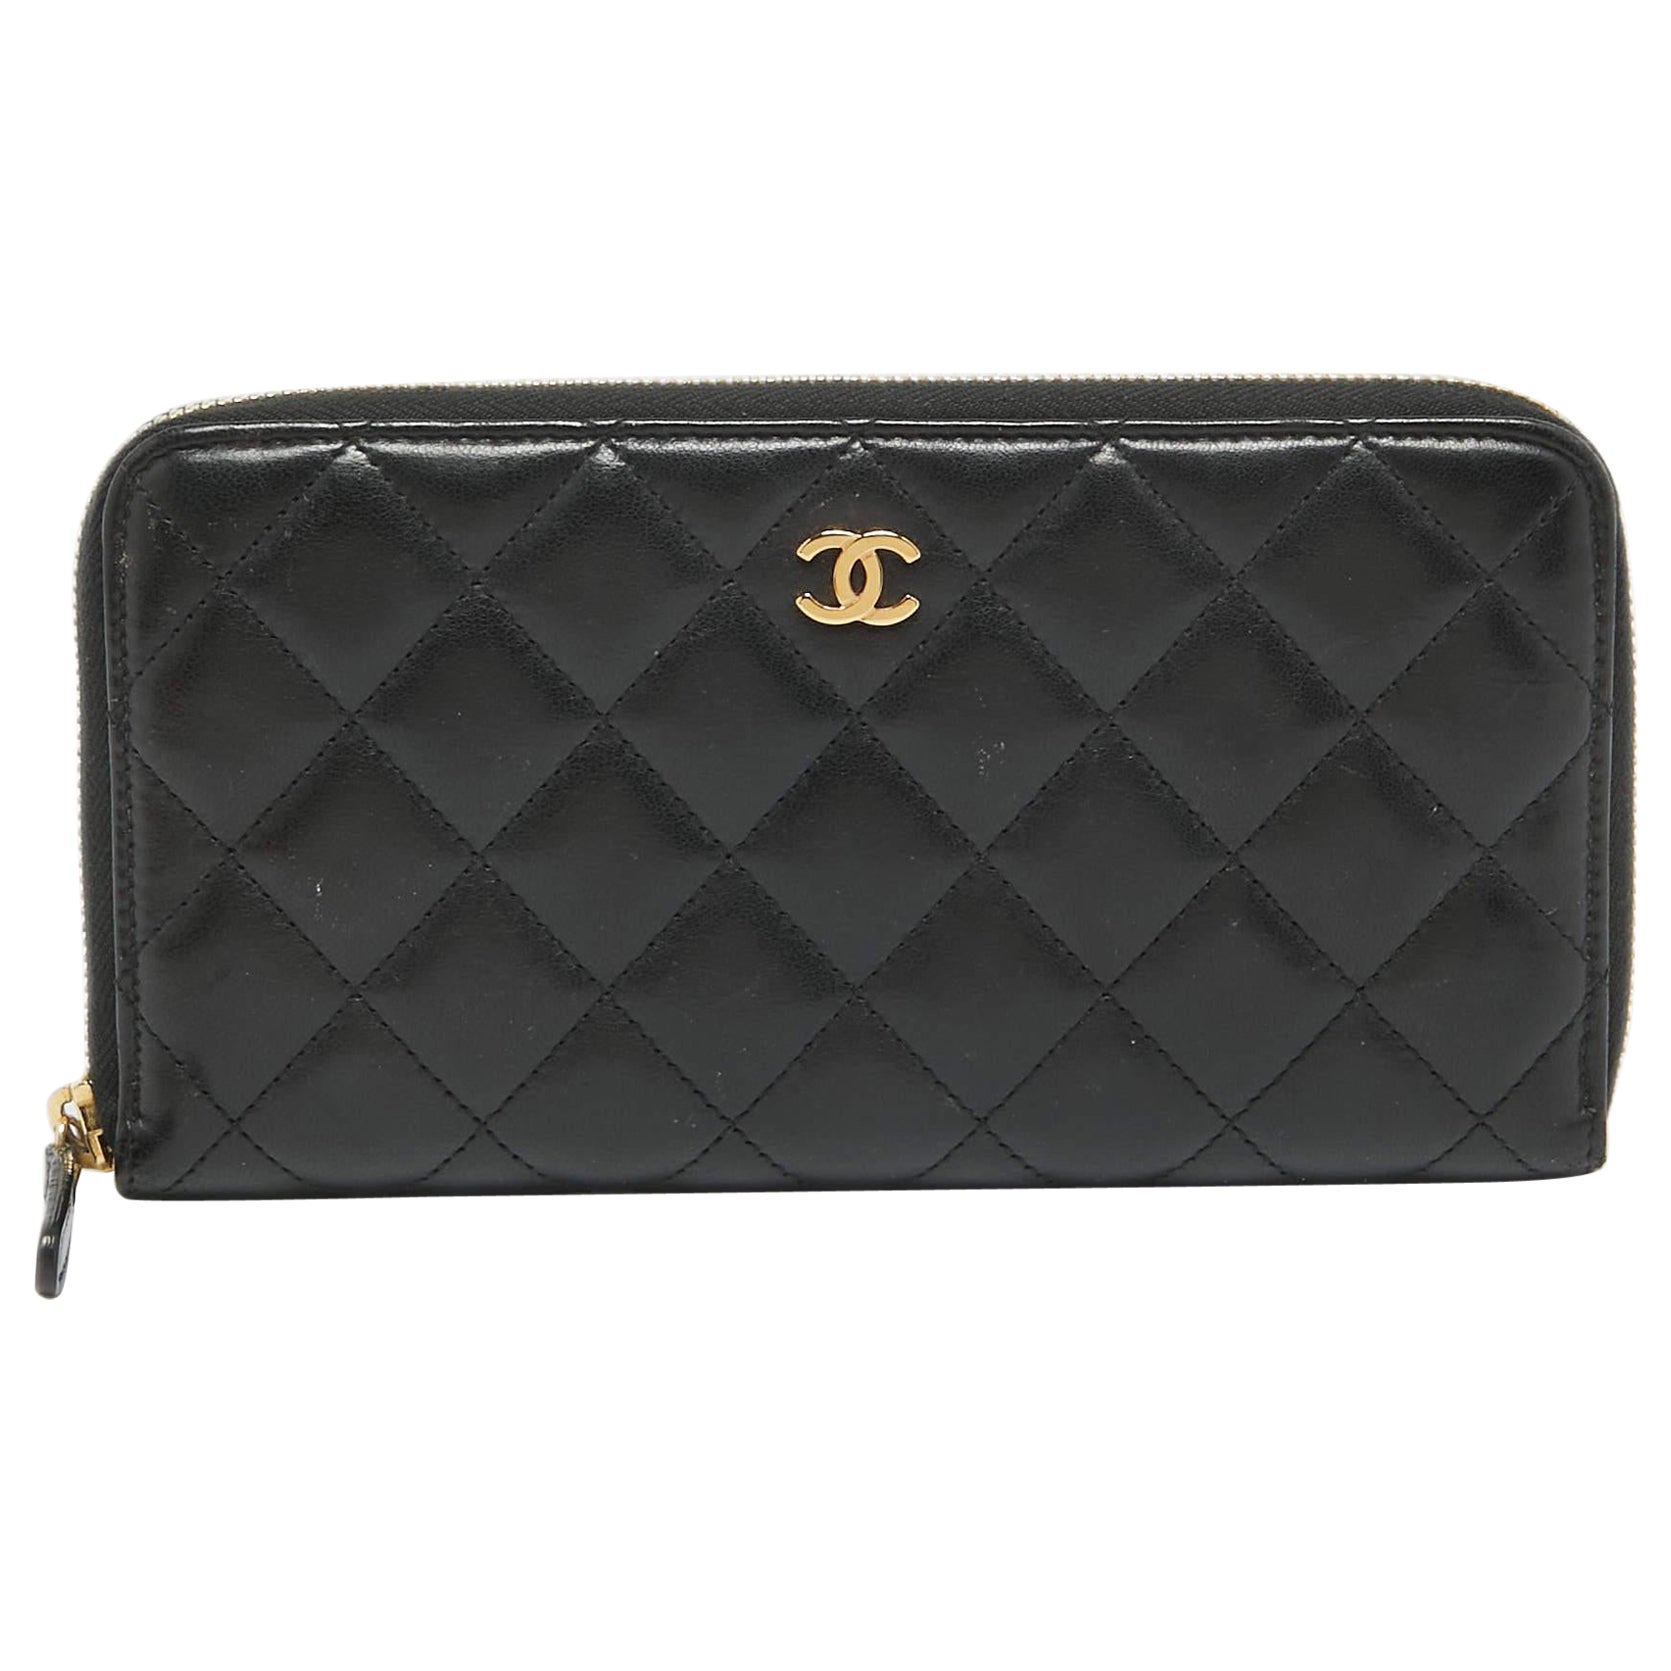 Chanel Black Quilted Leather Classic Zip Around Wallet im Angebot